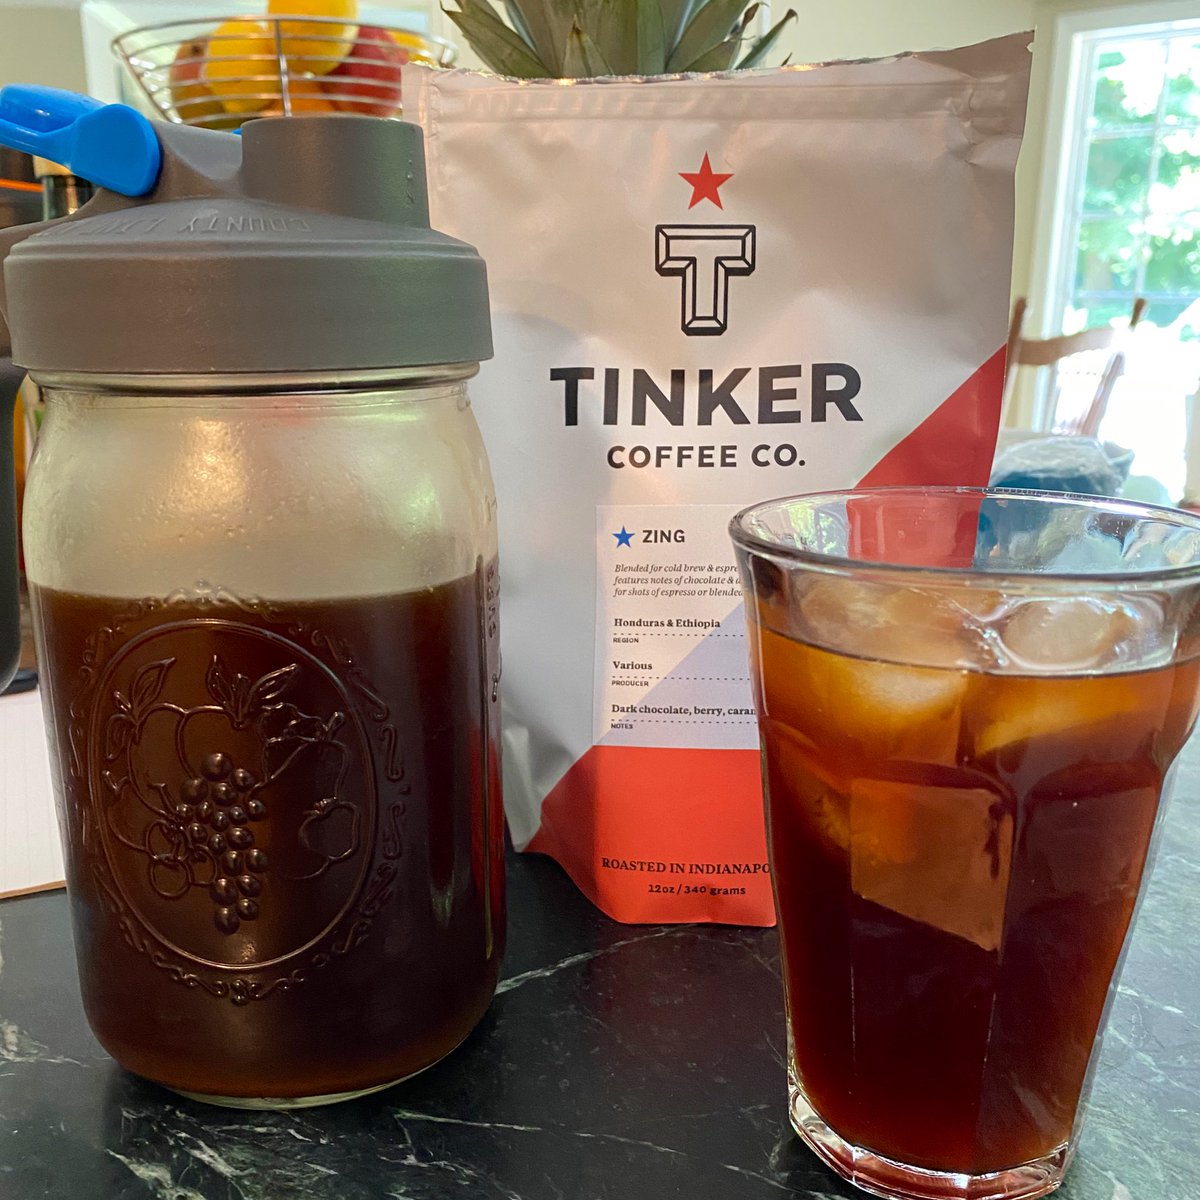 Tinker Coffee Co. ZingAbsolutely incredible cold brew from Indianapolis, it hits you with smooth caramel and dark chocolate for days. I already know that I’m going to run out of this one way too soon!